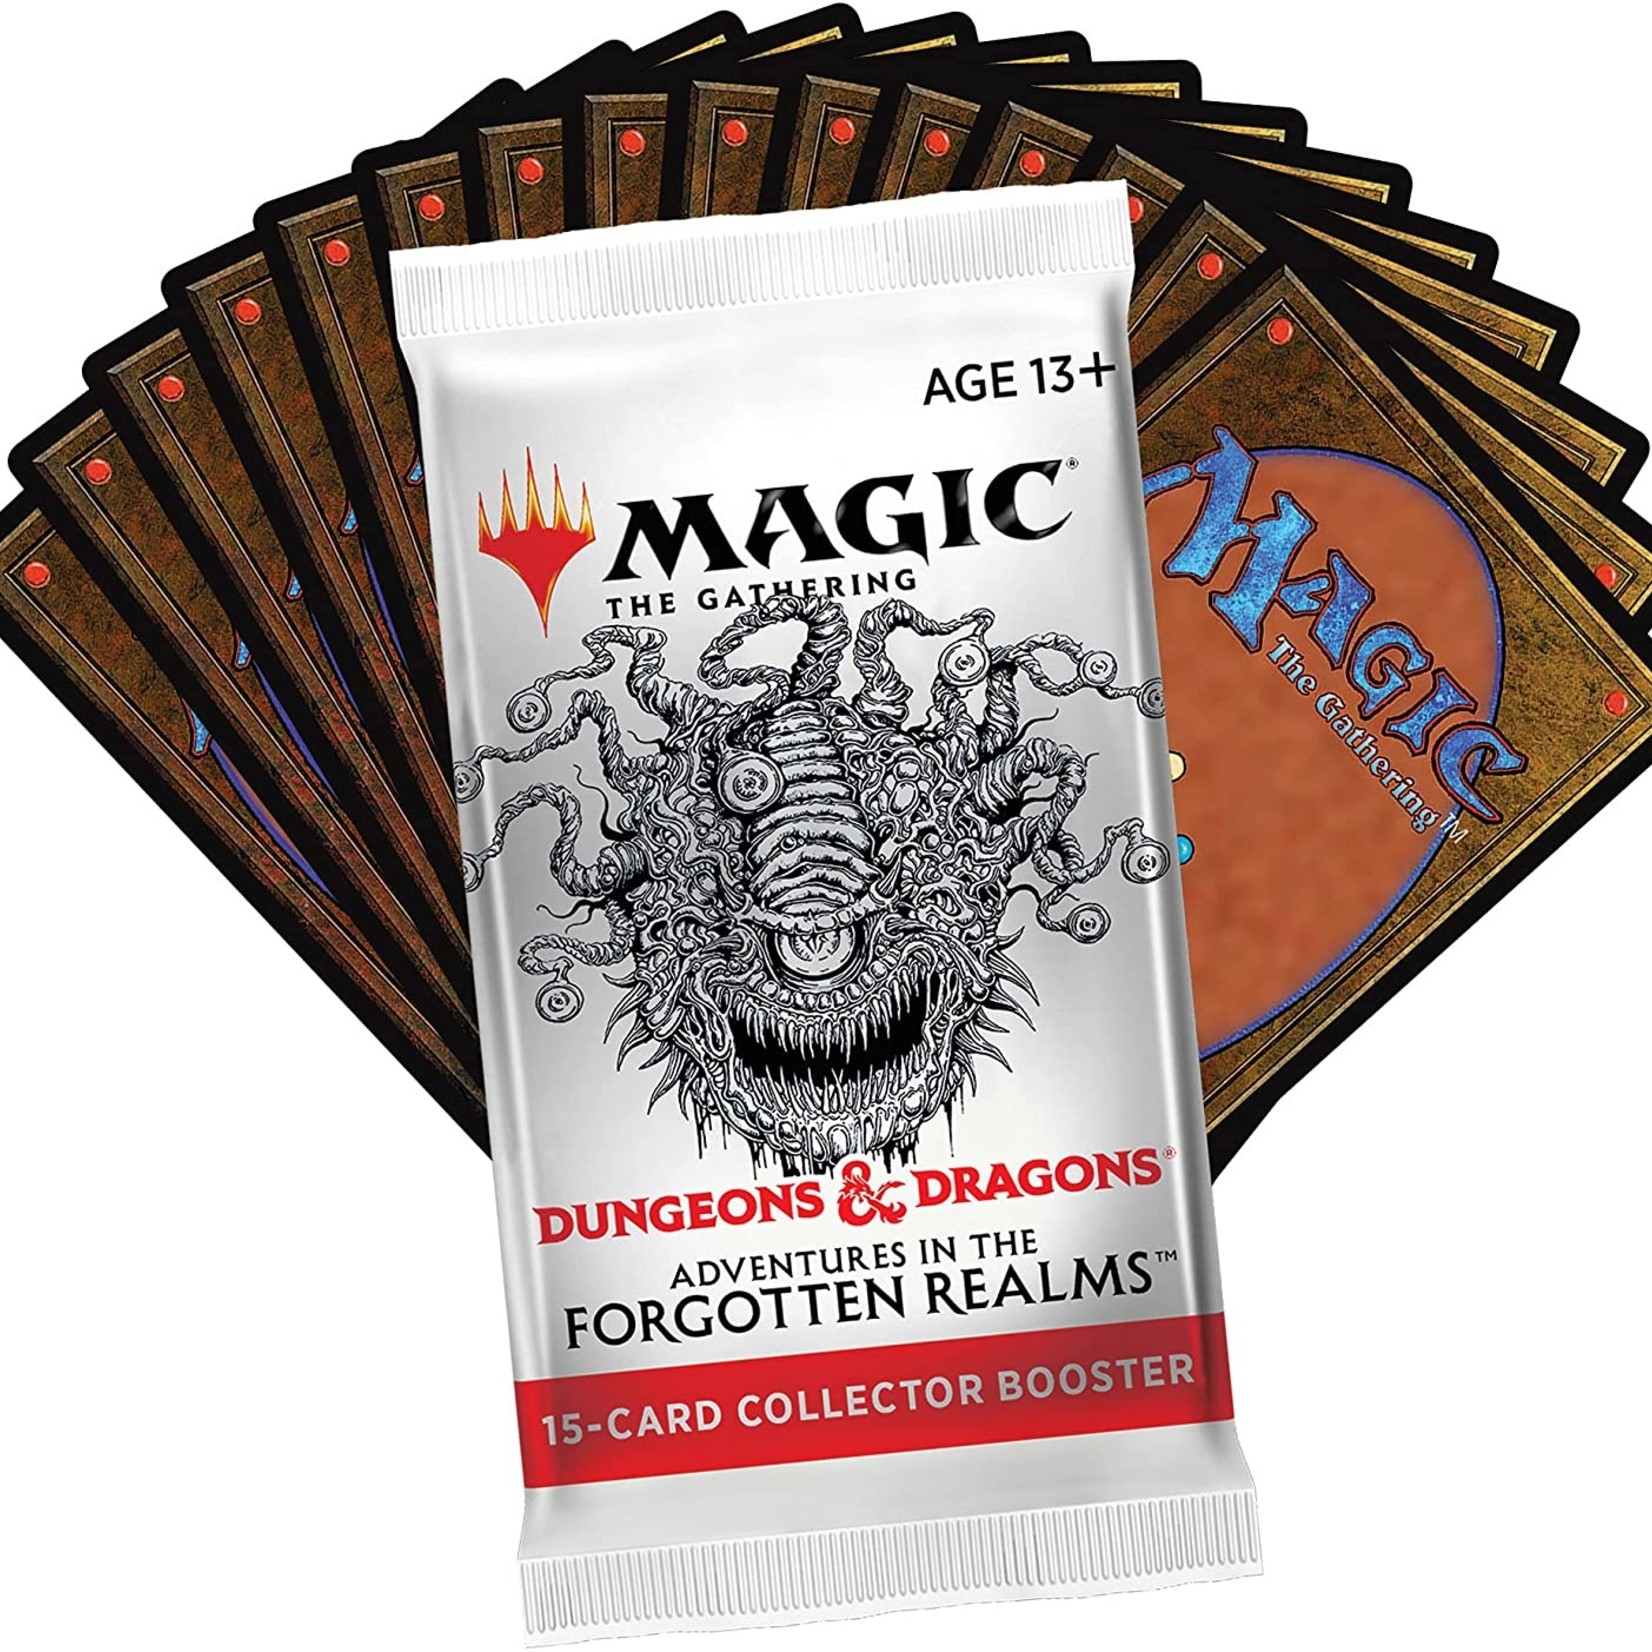 Wizards of the Coast Magic the Gathering: Dungeons & Dragons: Adventures in the Forgotten Realms - Collector Booster Pack